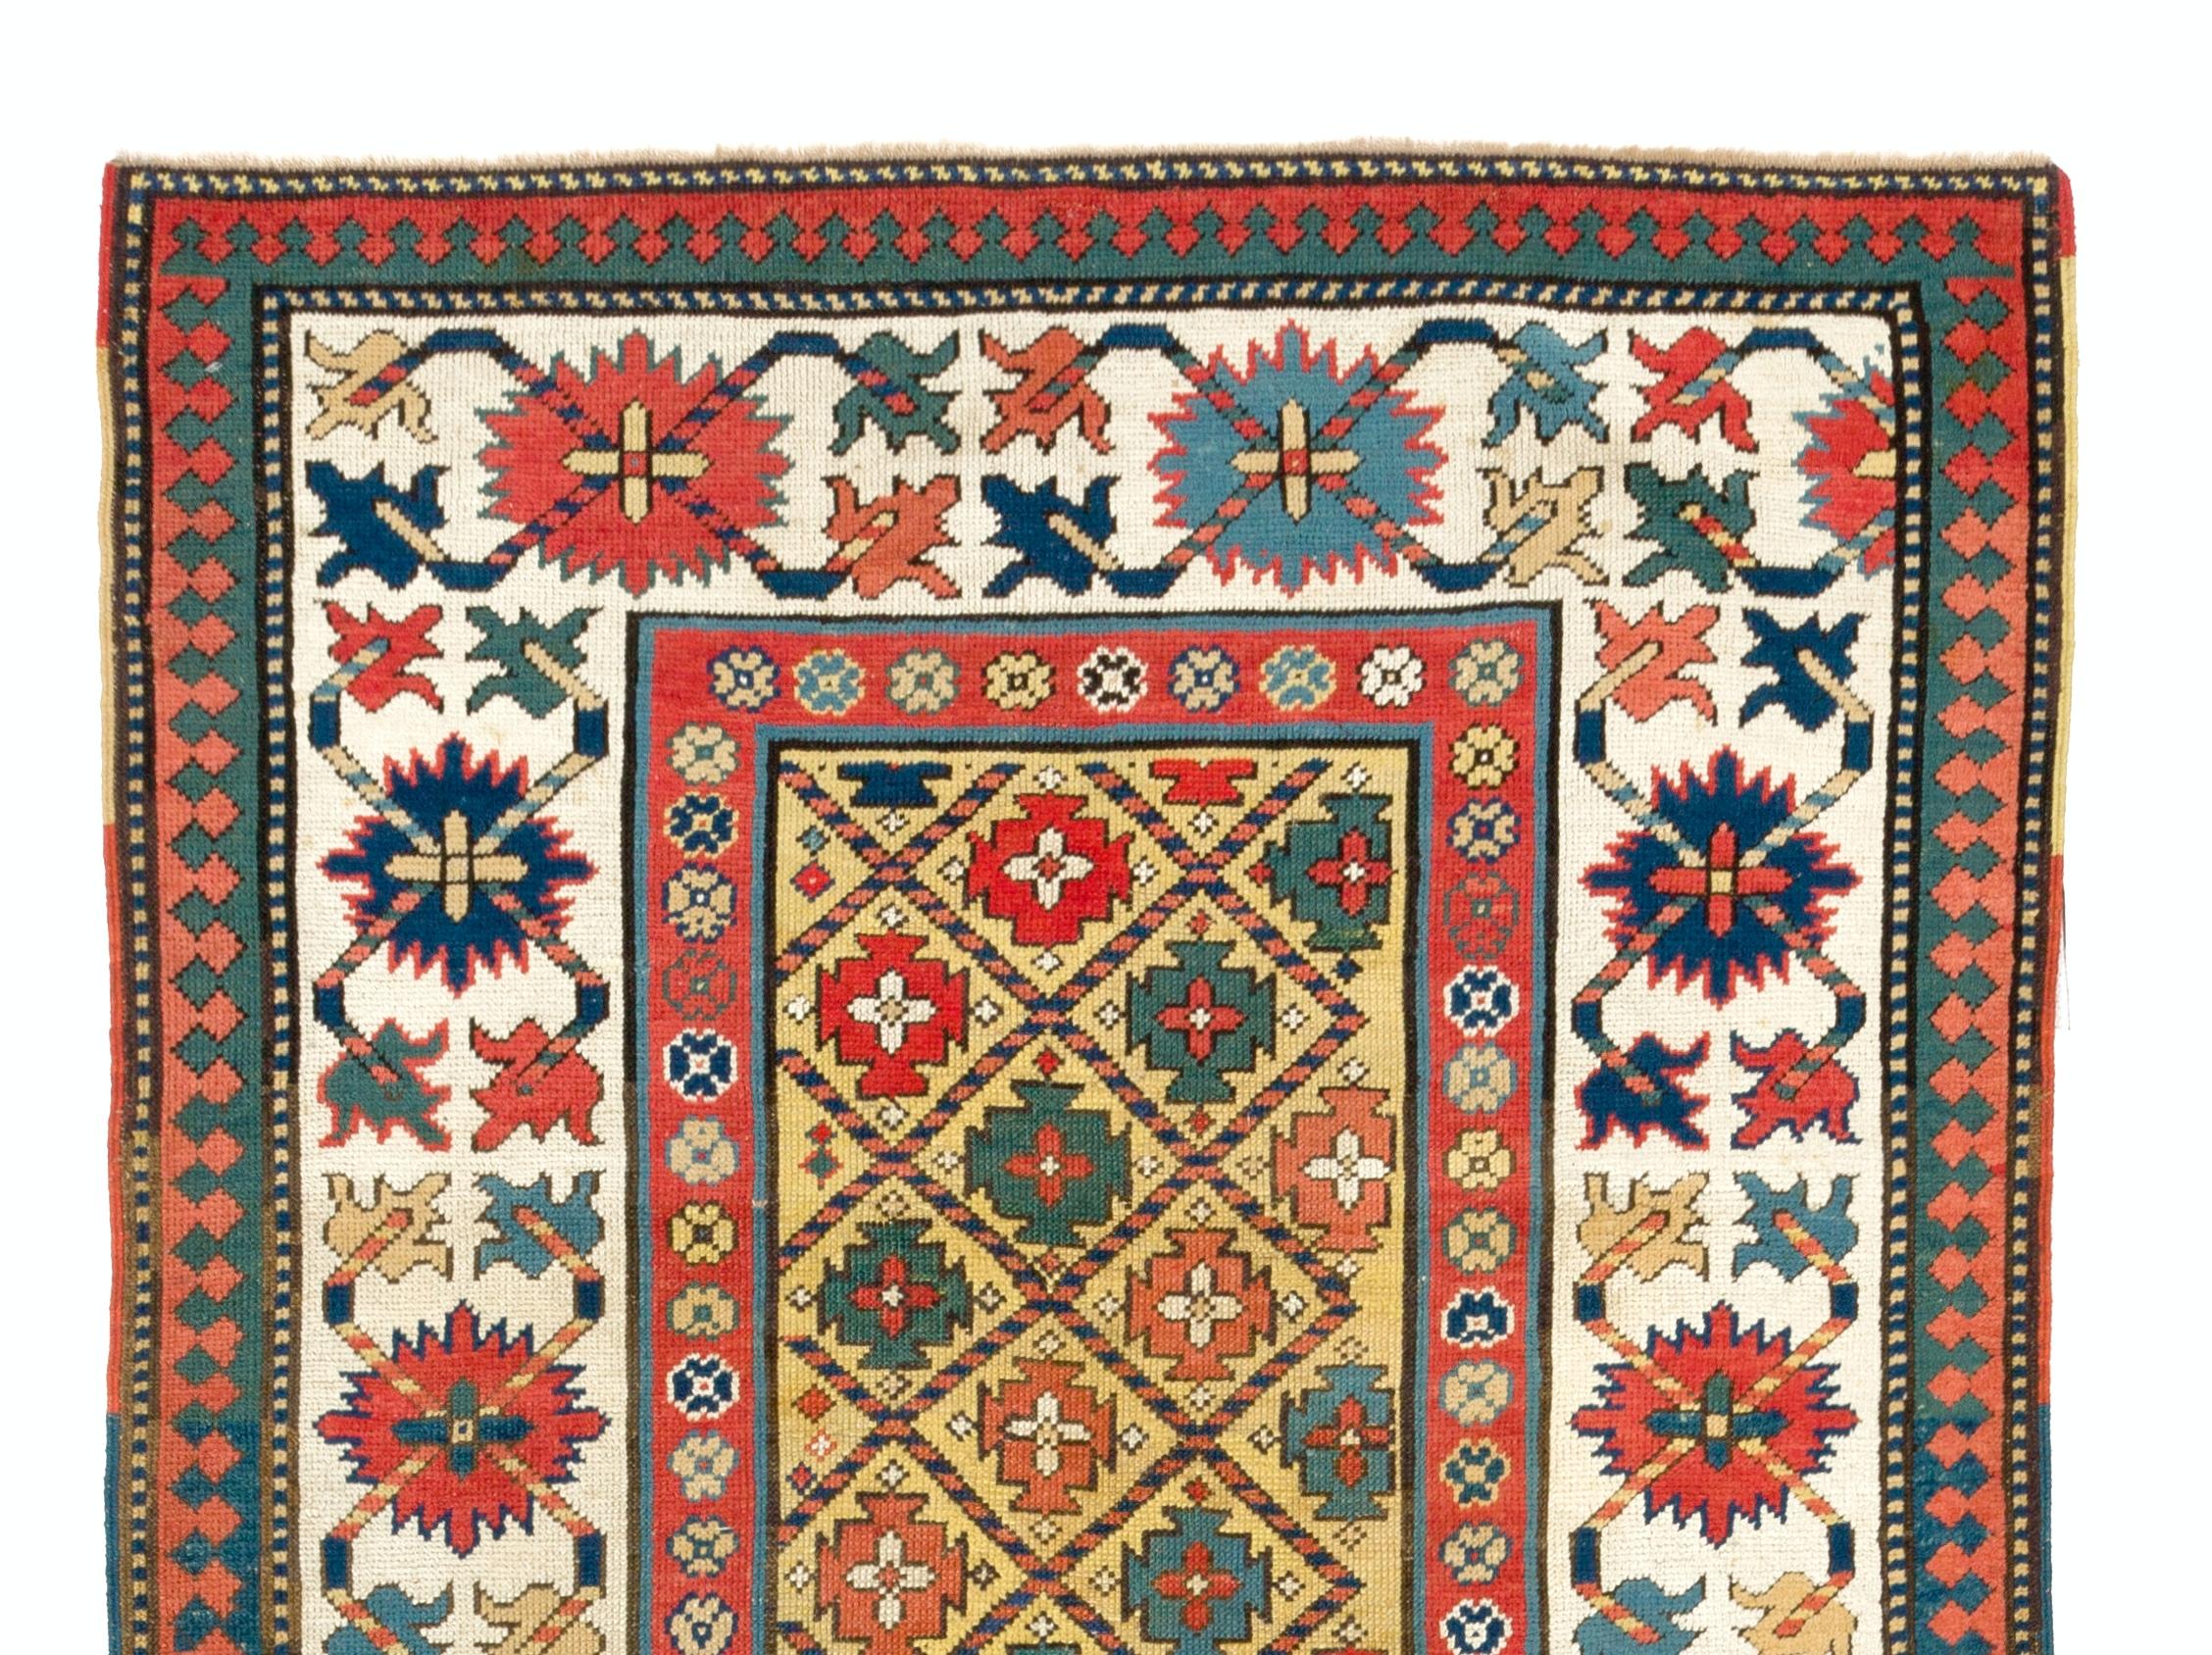 A truly outstanding antique South East Caucasian rug in well preserved condition and with saturated natural dyes including the abrash, the changes in the color tone on the yellow field which is all original. Measures: 3.7 x 8.9 Ft.